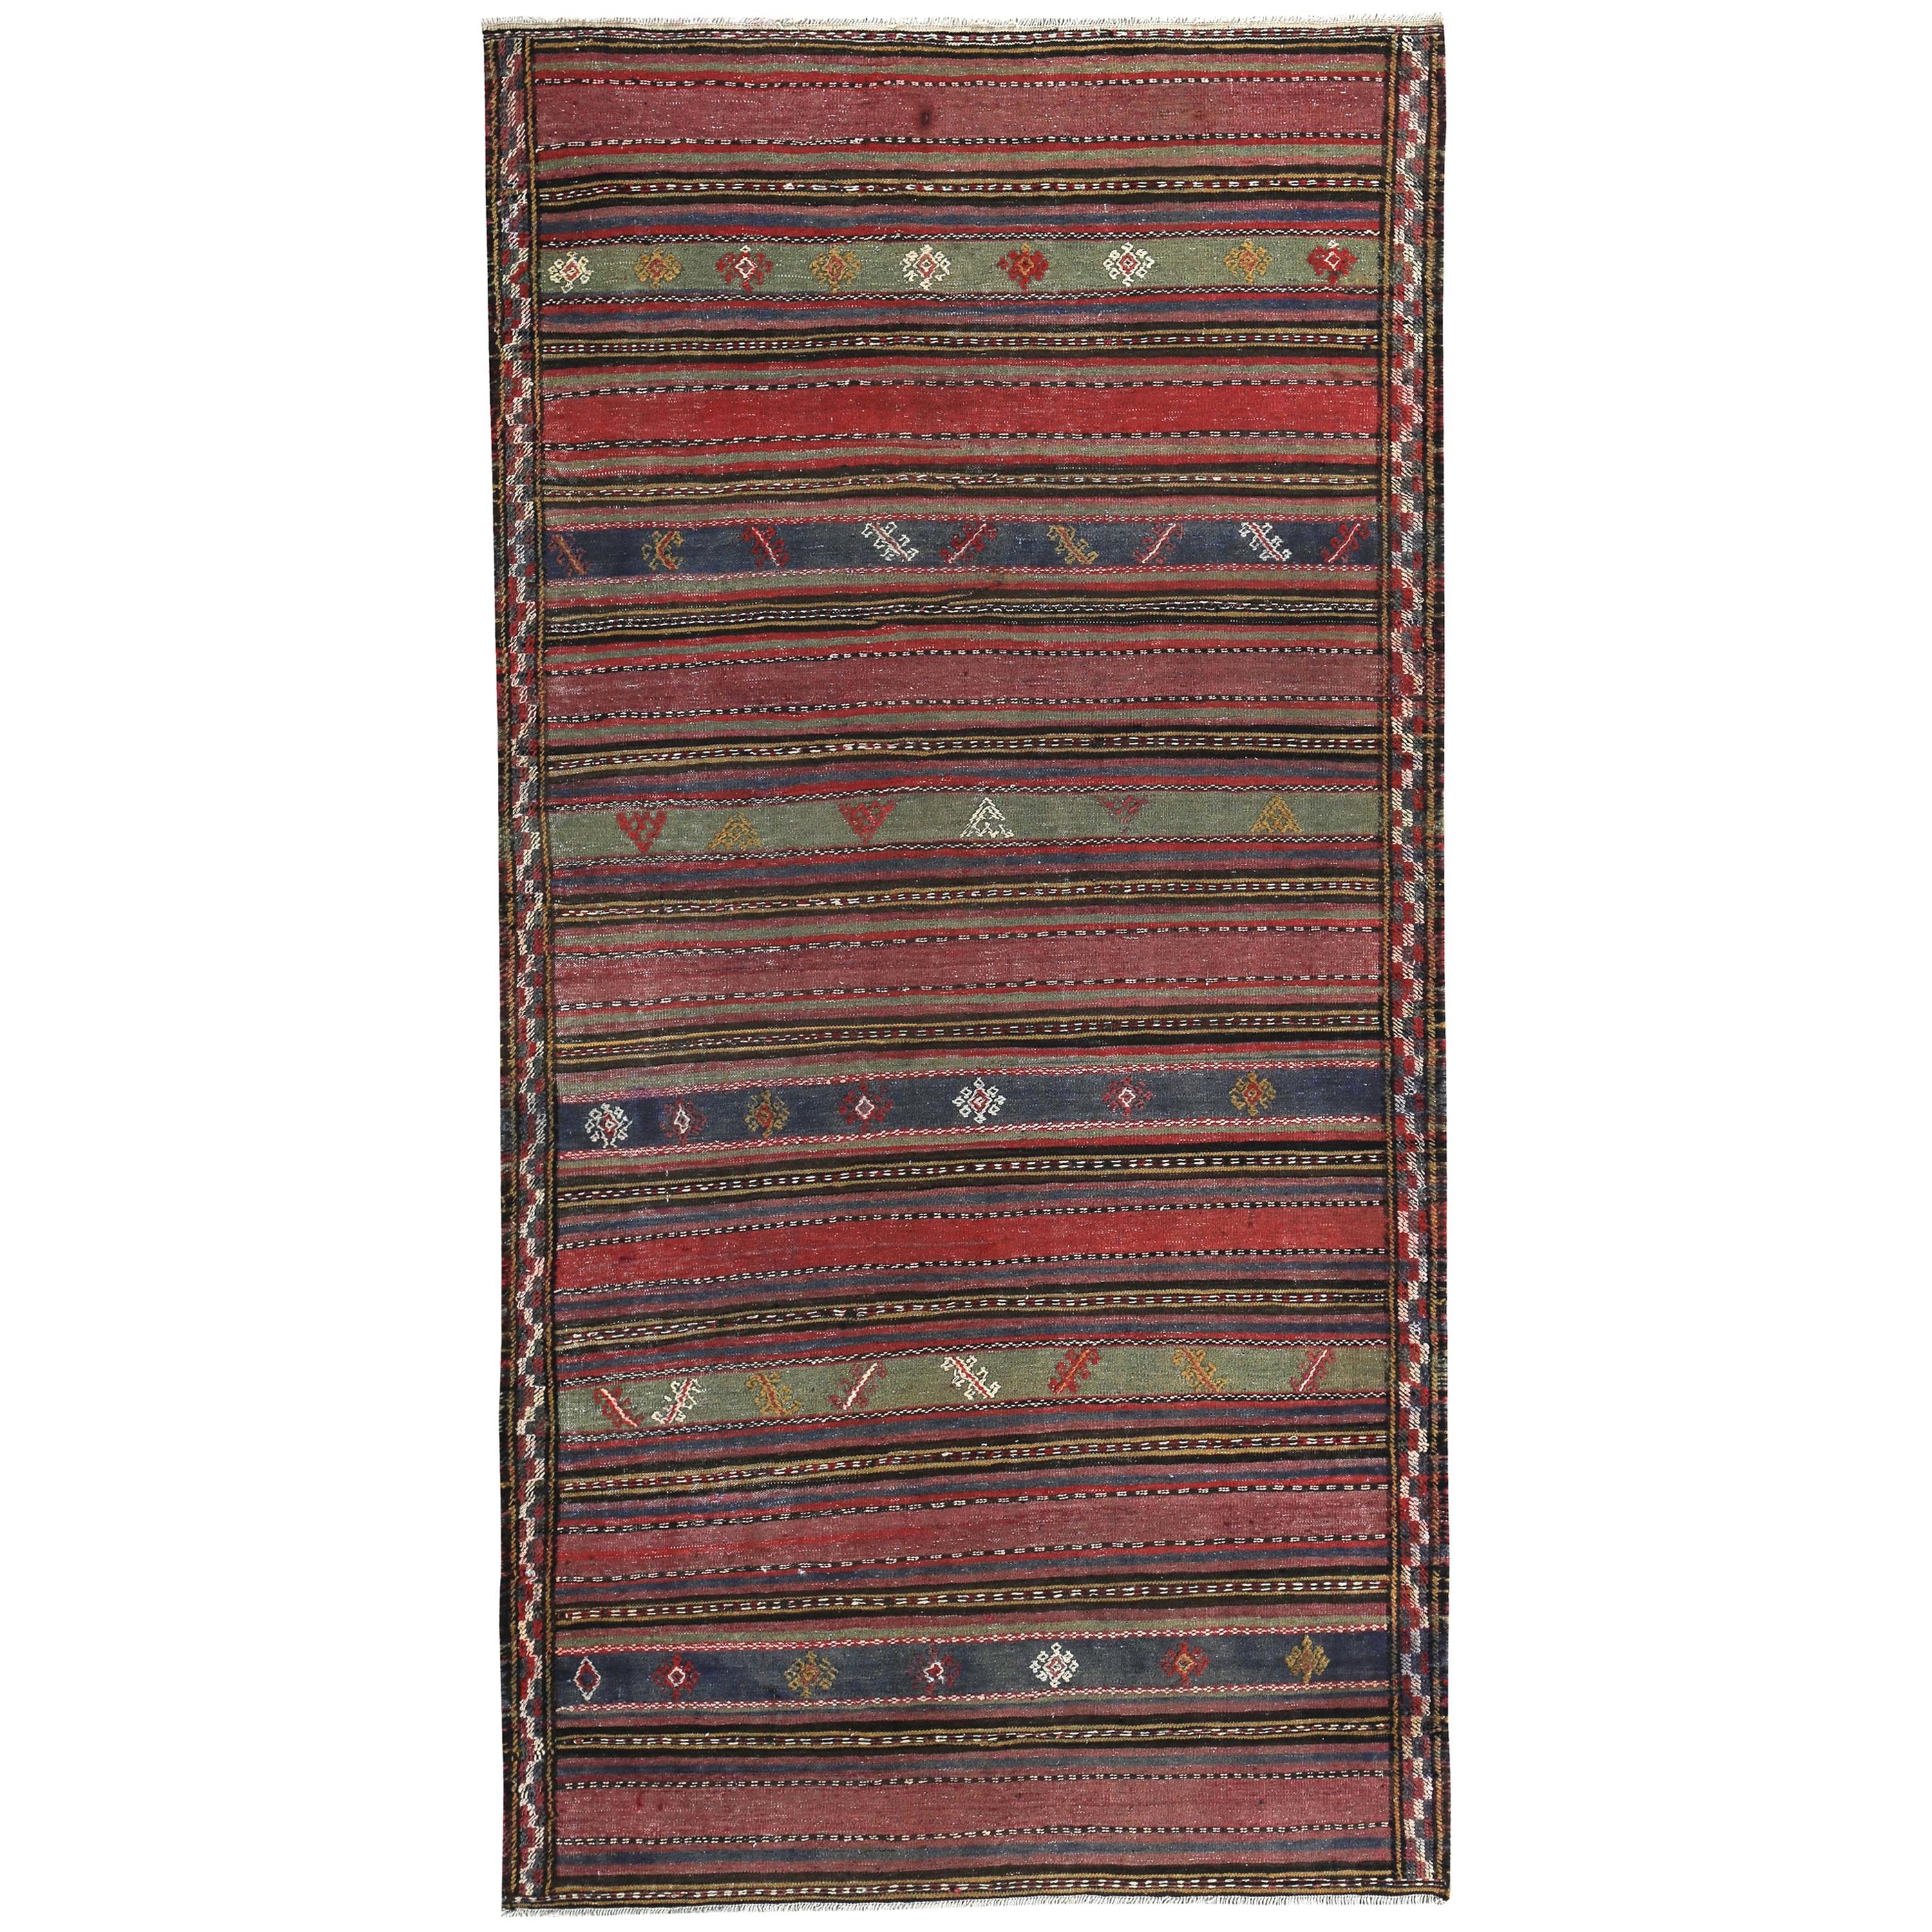 Modern Turkish Kilim Rug with Red, Green and Navy Stripes on Brown Field